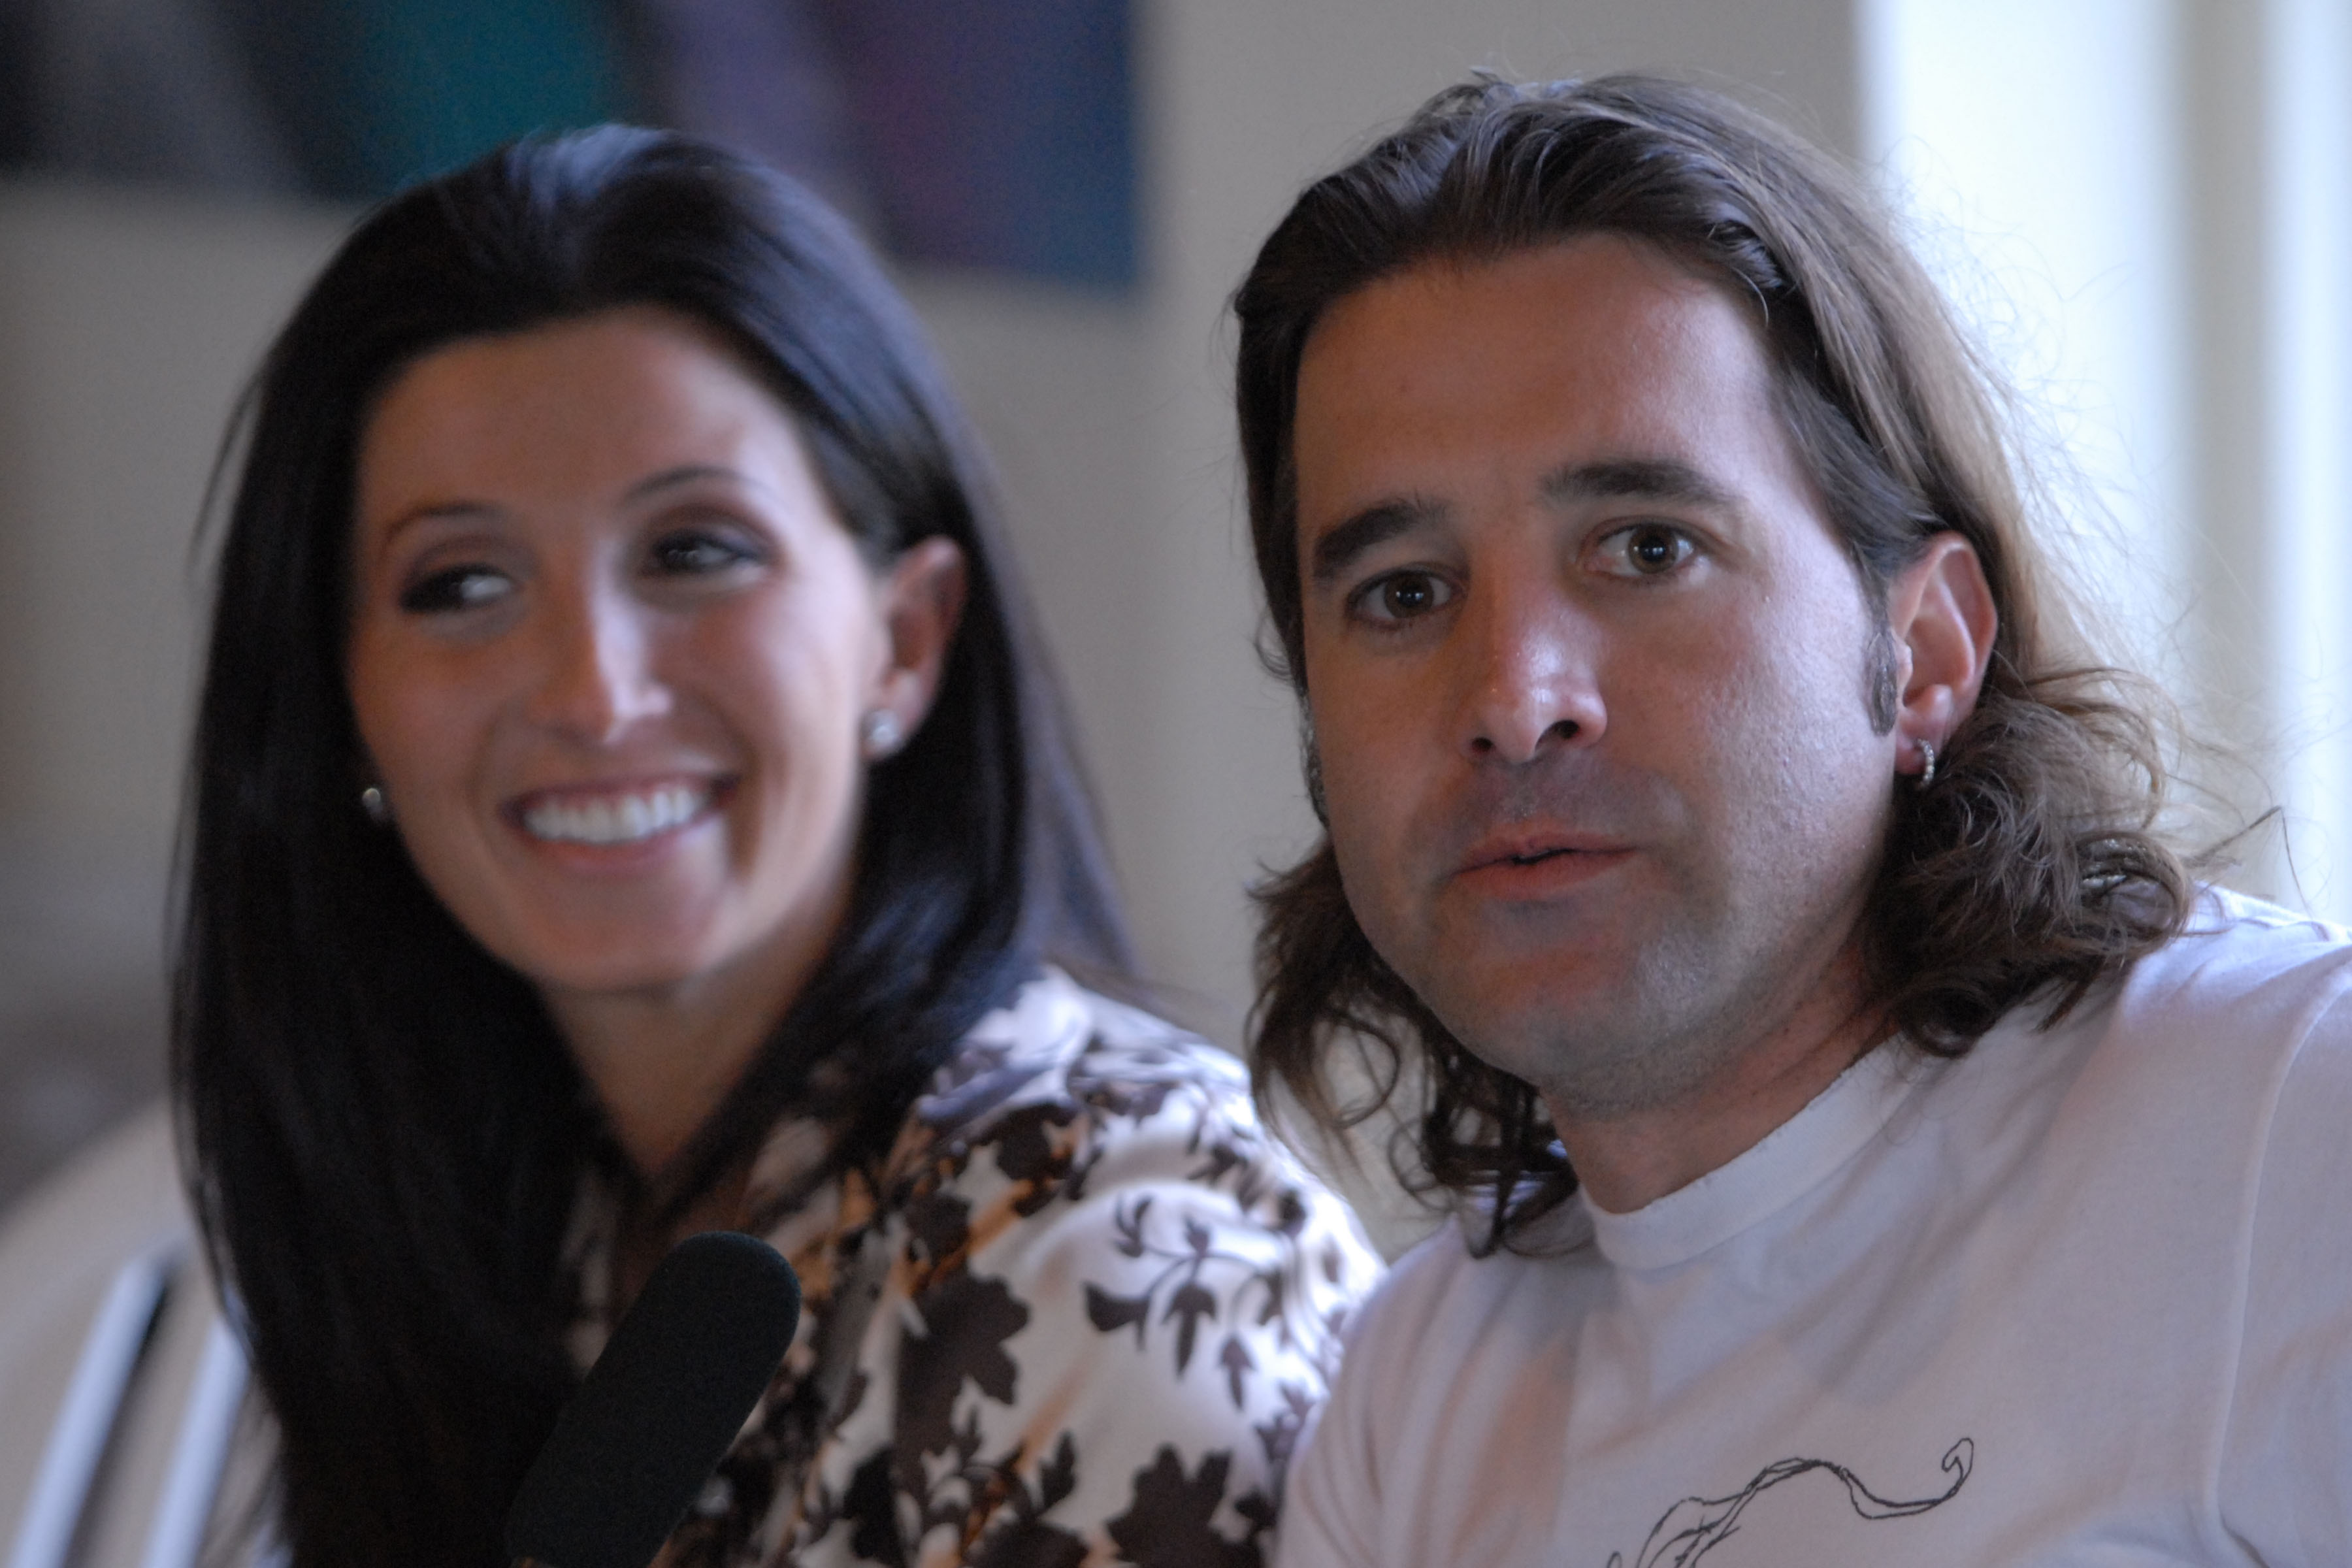 BOCA RATON, FL - MAY 8:  Creed lead singer Scott Stapp and his wife Jaclyn Nesheiwat announce their sponsorship for The Haven